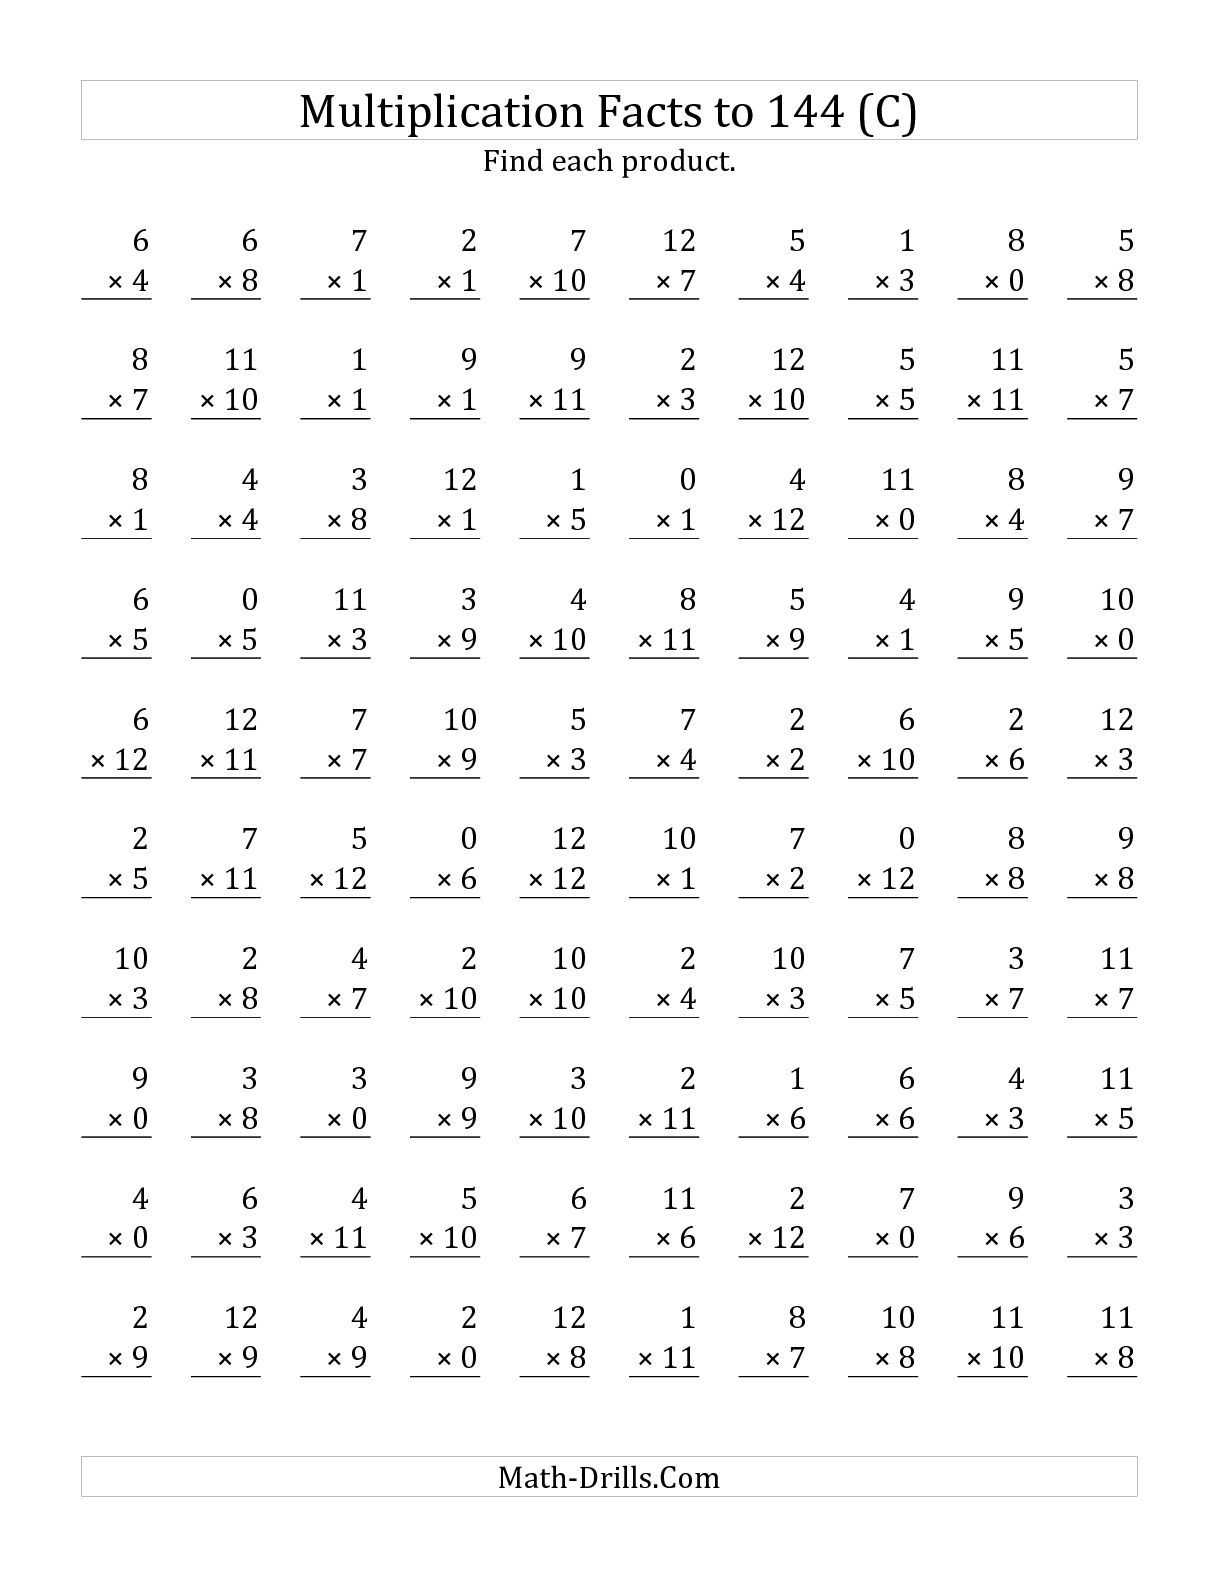 The Multiplication Facts To 144 Including Zeros (C) Math intended for Printable Multiplication Facts Quiz